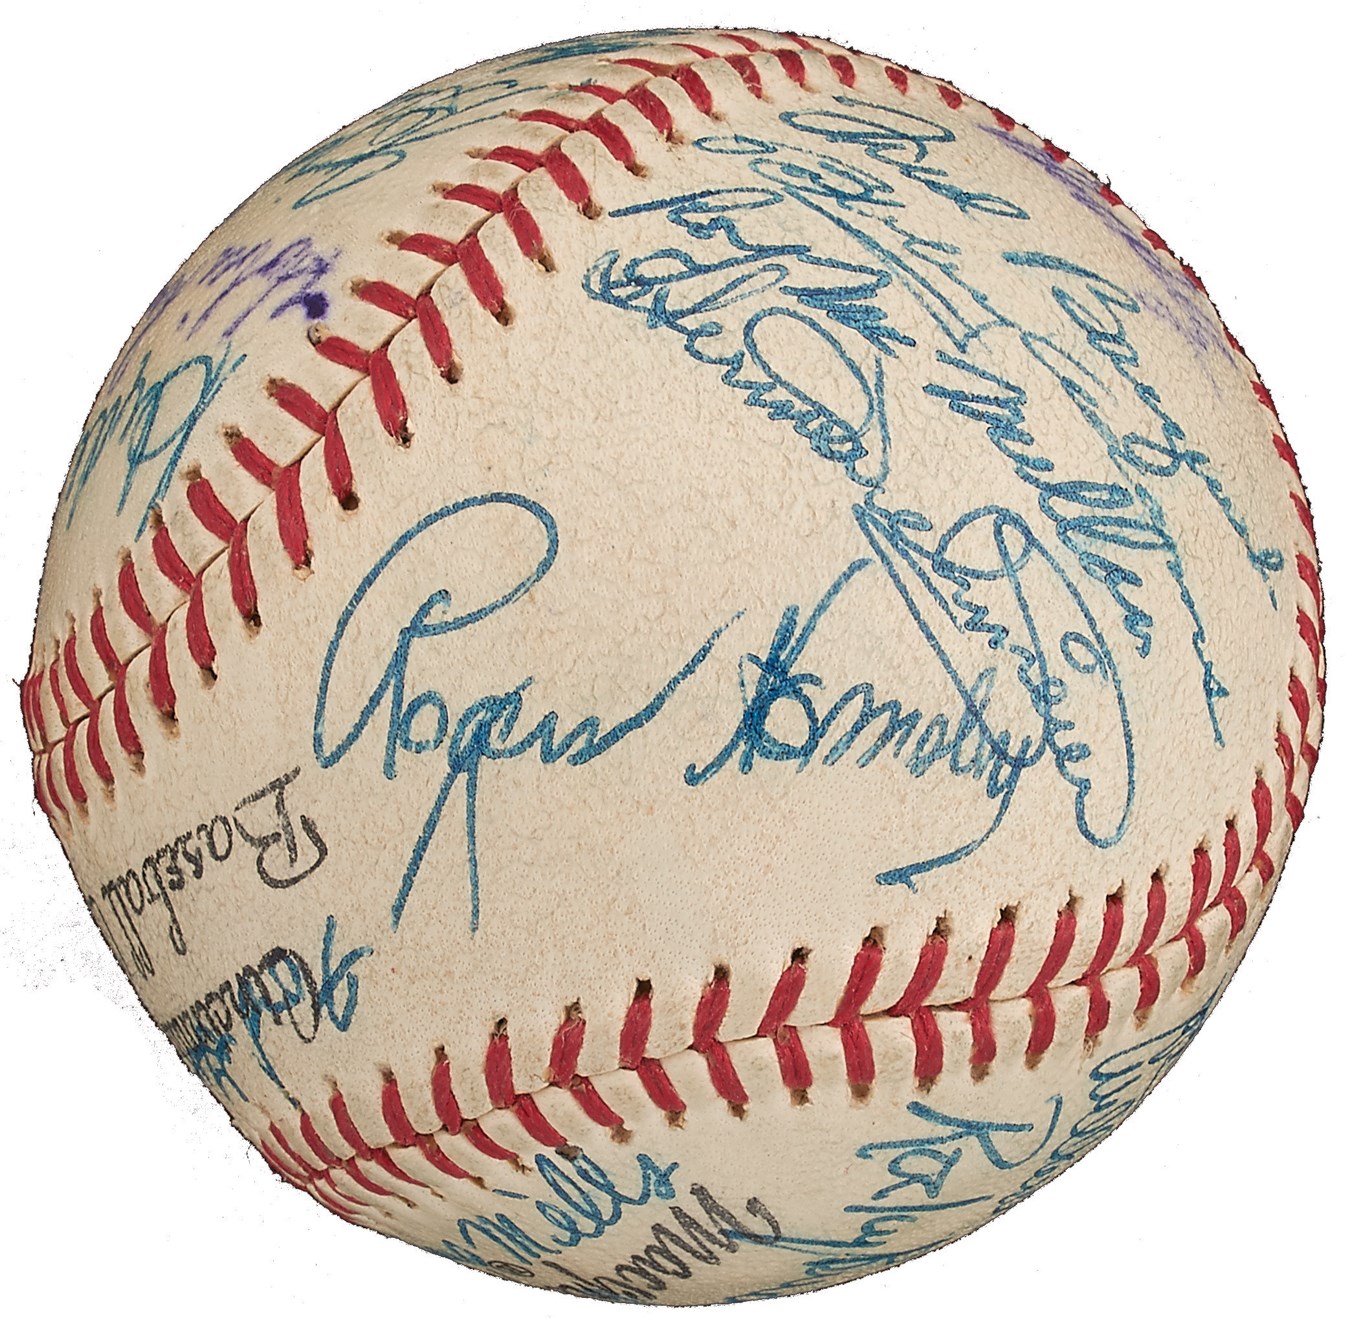 - 1953 Cincinnati Reds Team-Signed Baseball with Rogers Hornsby (PSA)